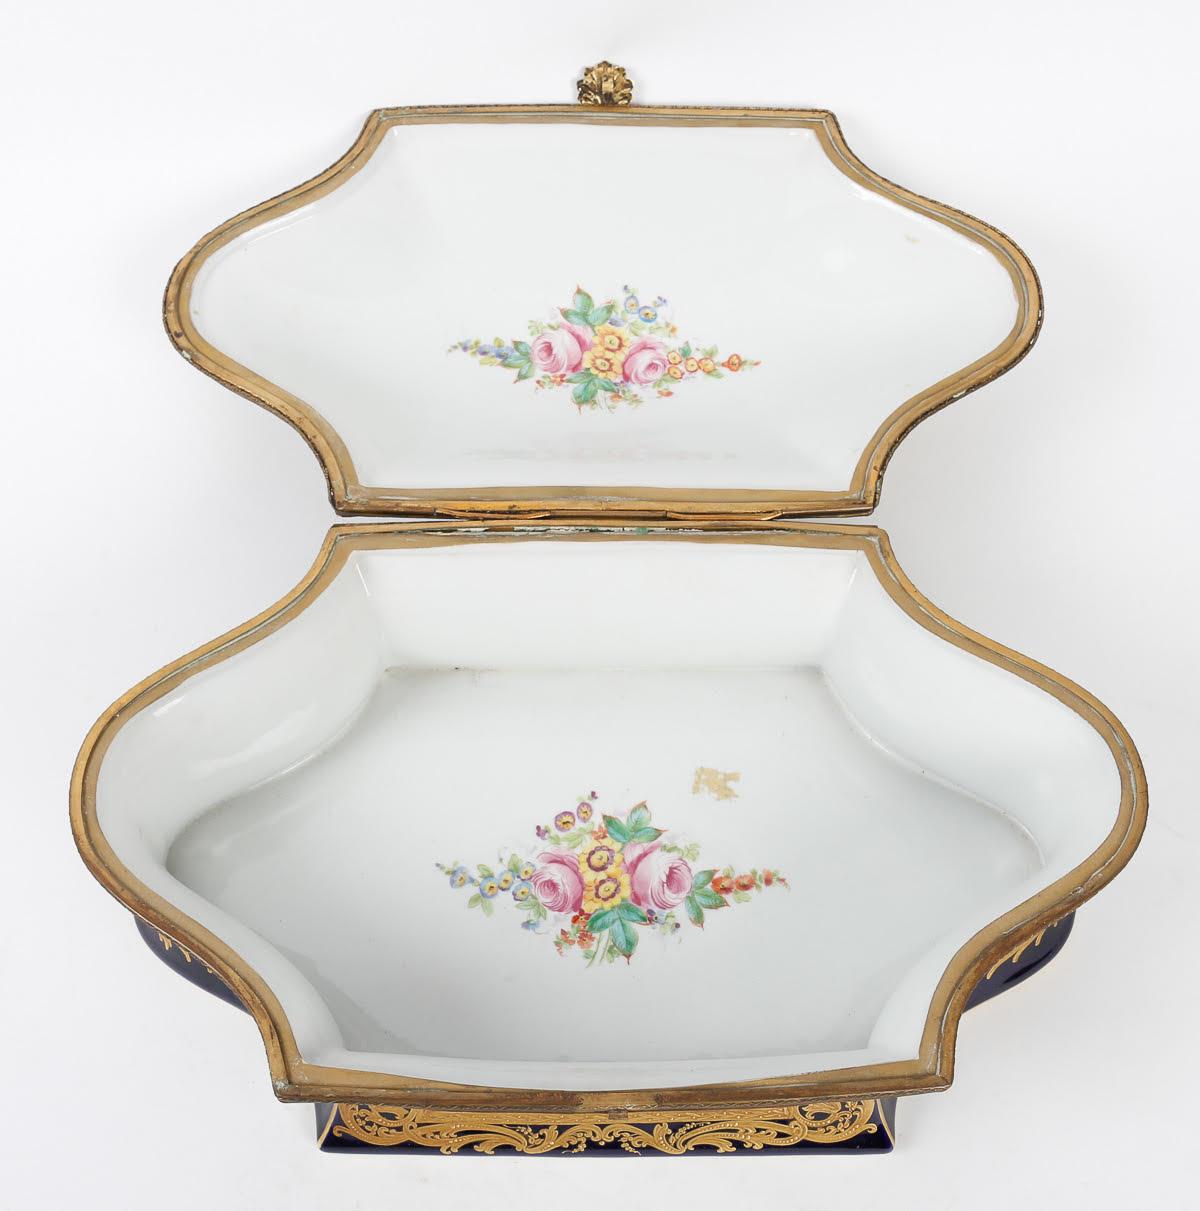 French Large Jewellery Box in the Taste of Sèvres, 19th Century.